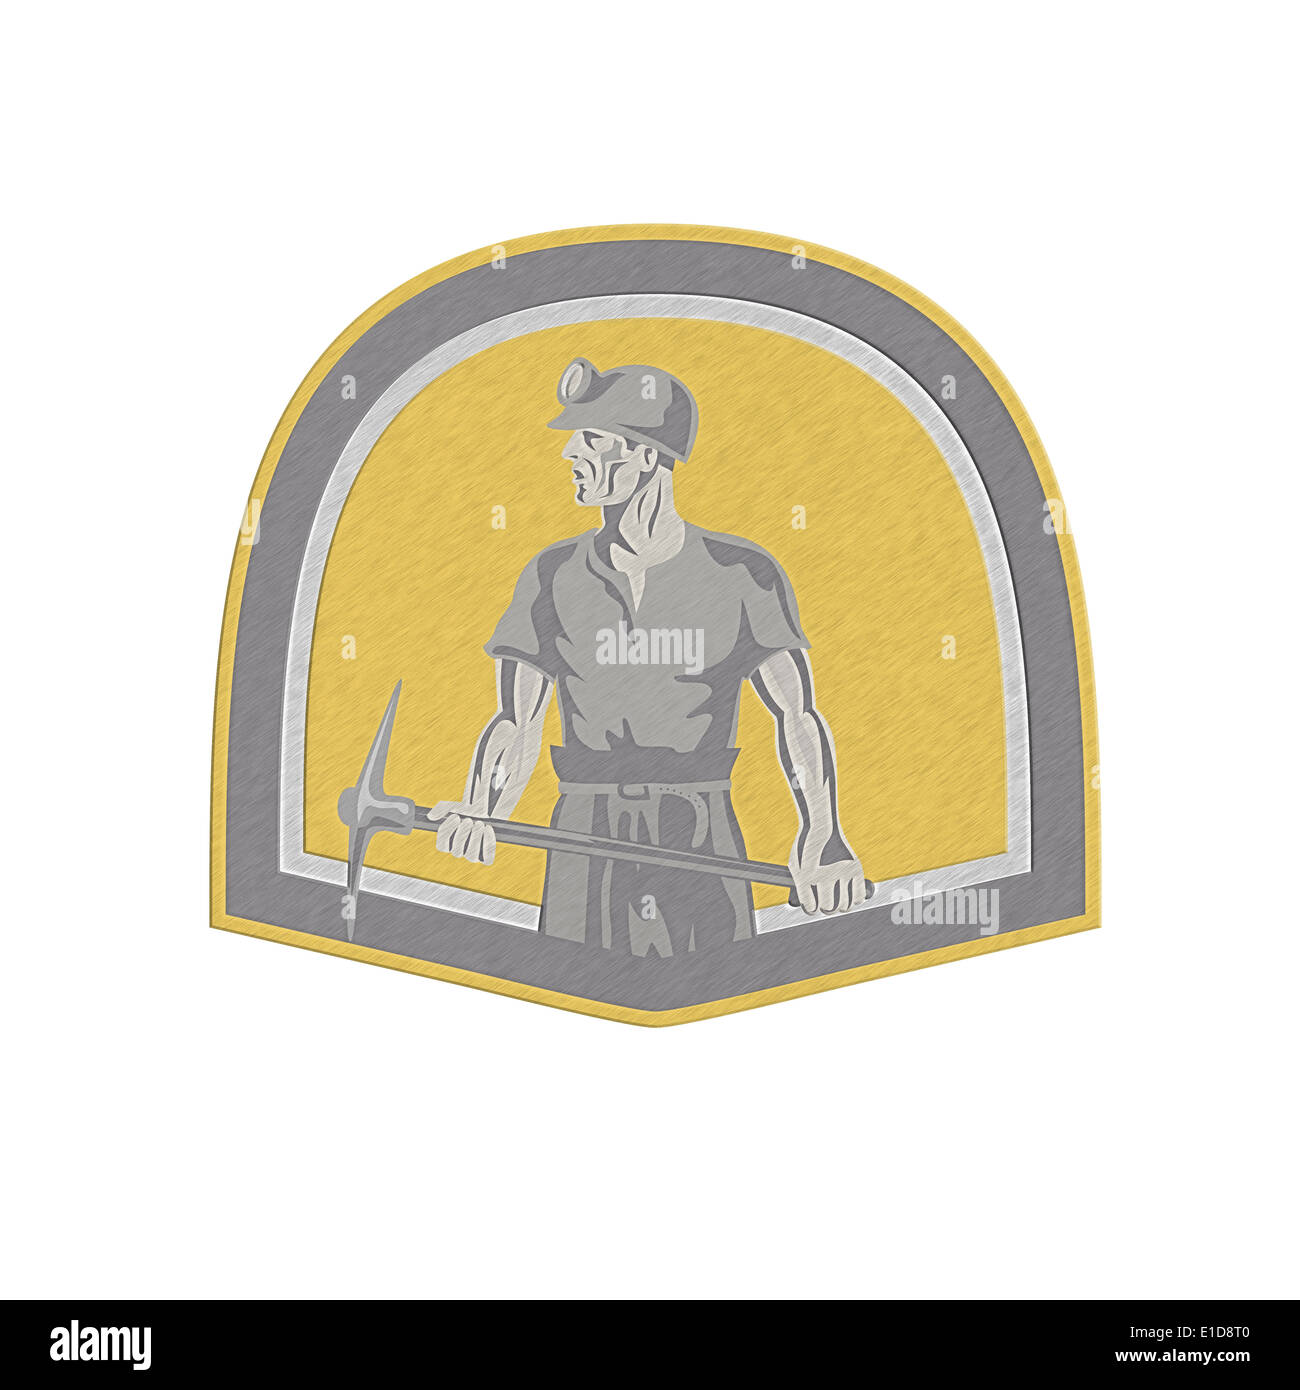 Metallic styled Illustration of a coal miner wearing hardhat looking to the side holding a pick axe set inside shield crest done Stock Photo